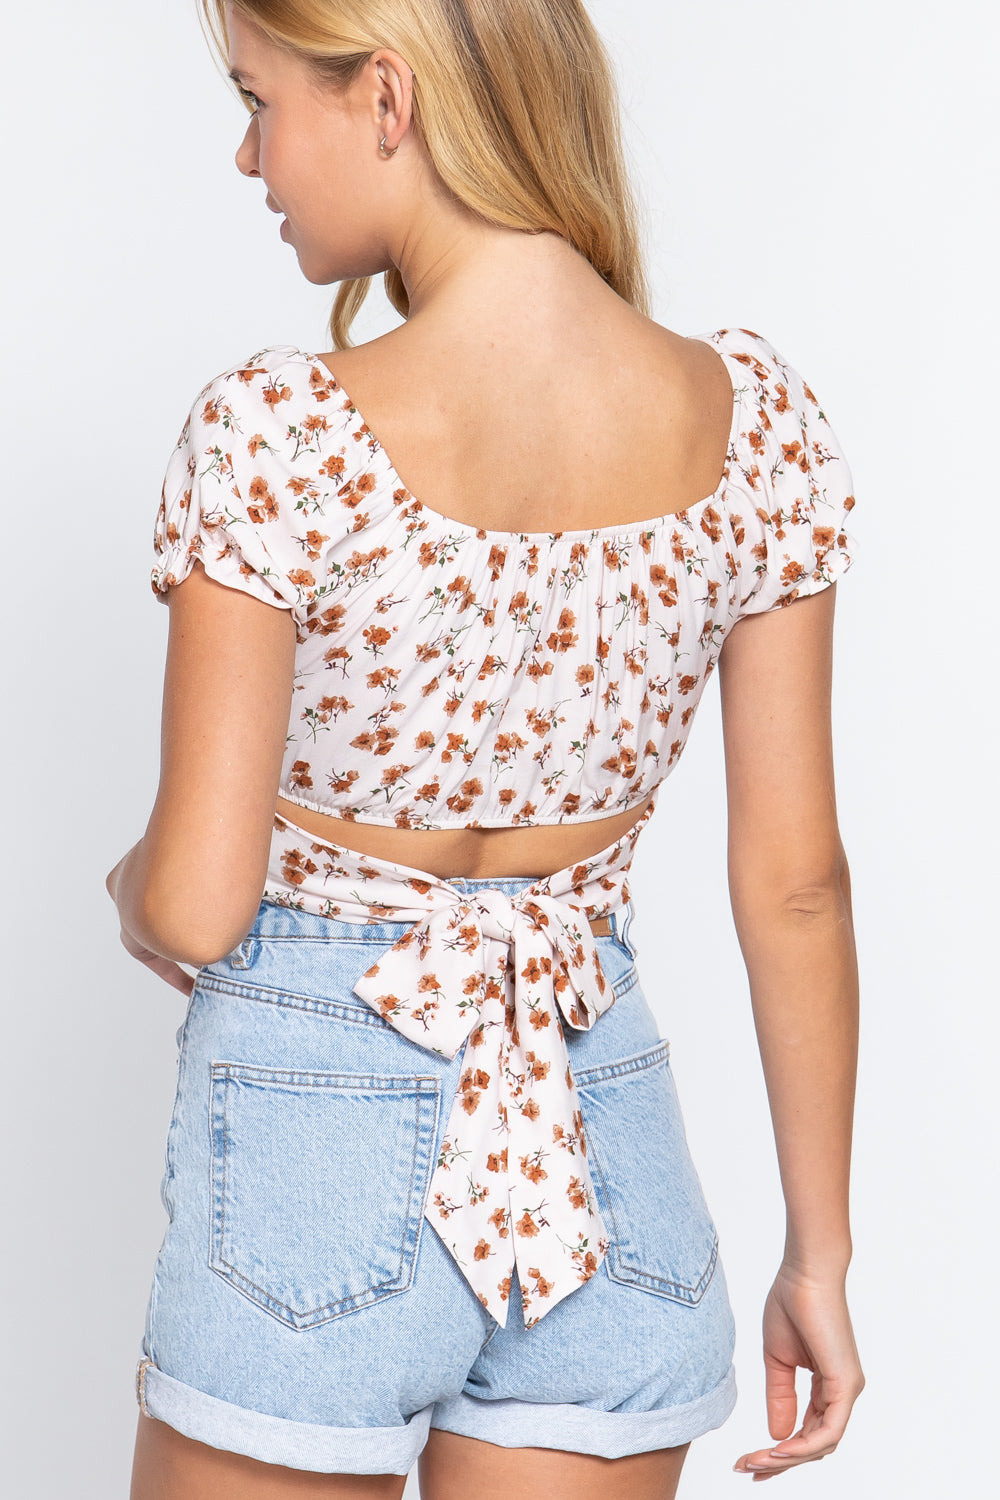 Short Puffed Sleeves Printed Floral Top with Bow Tie Back, Cream - Small